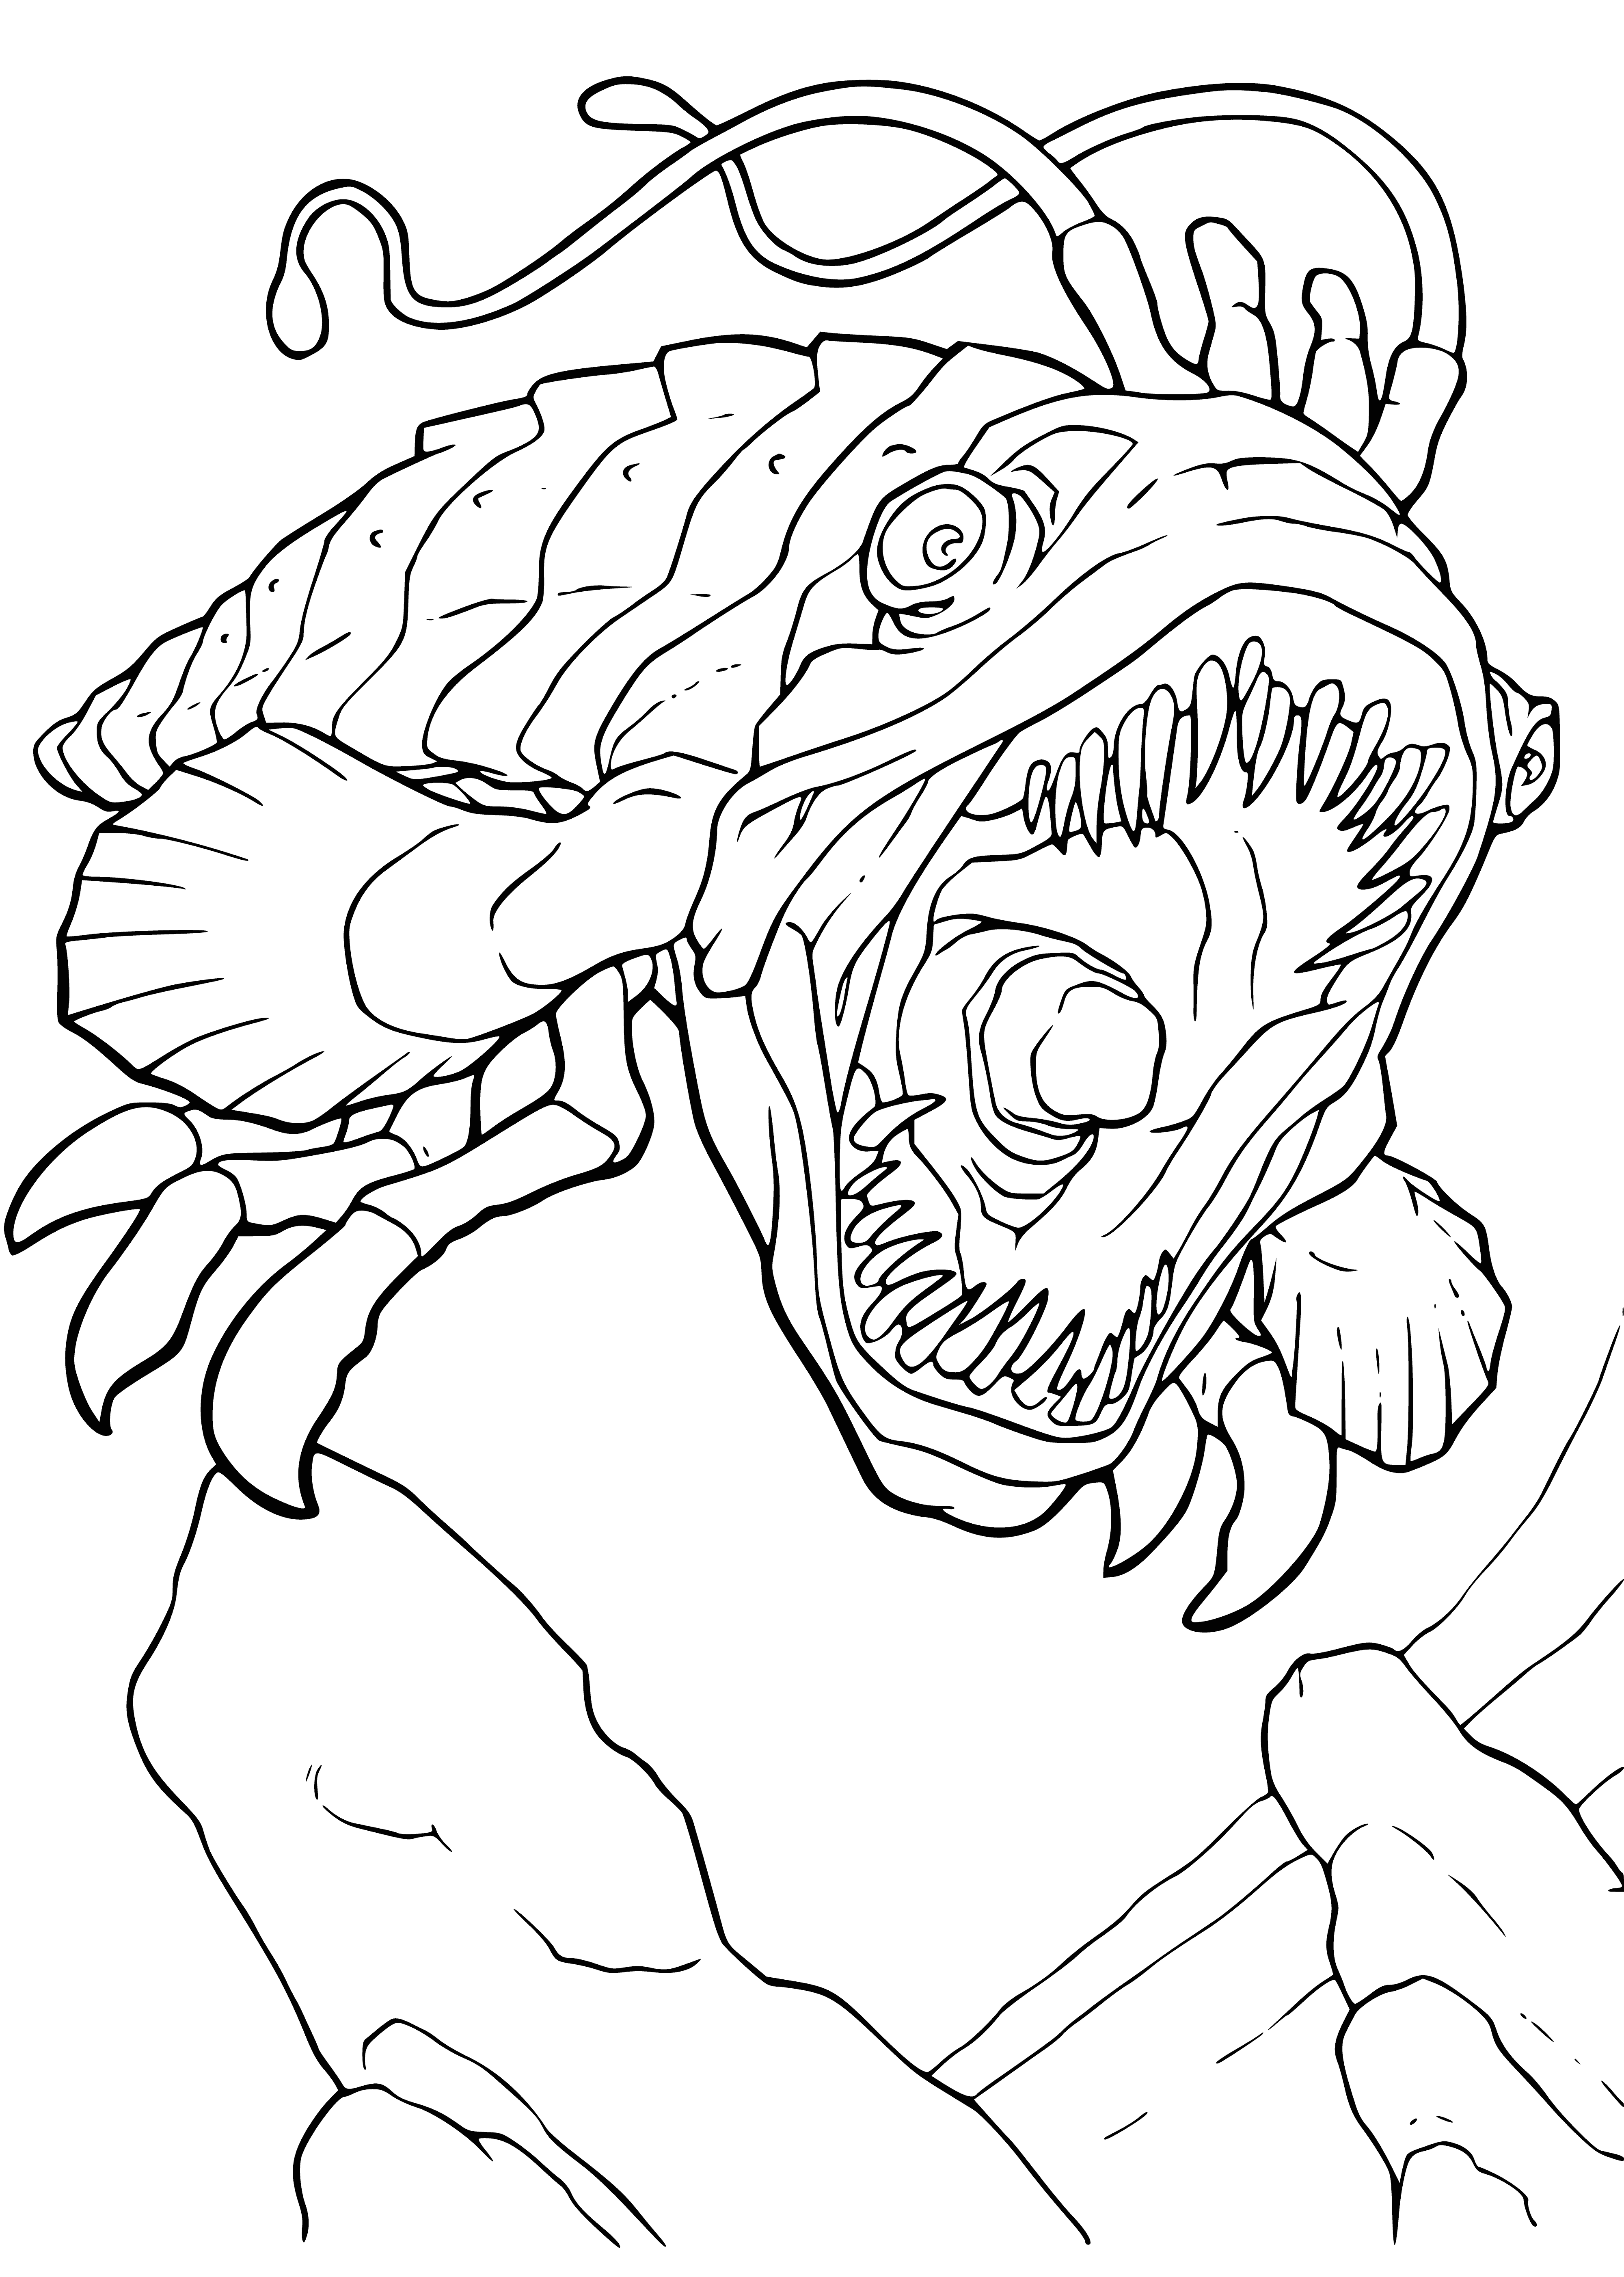 coloring page: Coloring page of a large dark creature with tentacles, surrounded by smaller creatures fighting or fleeing.